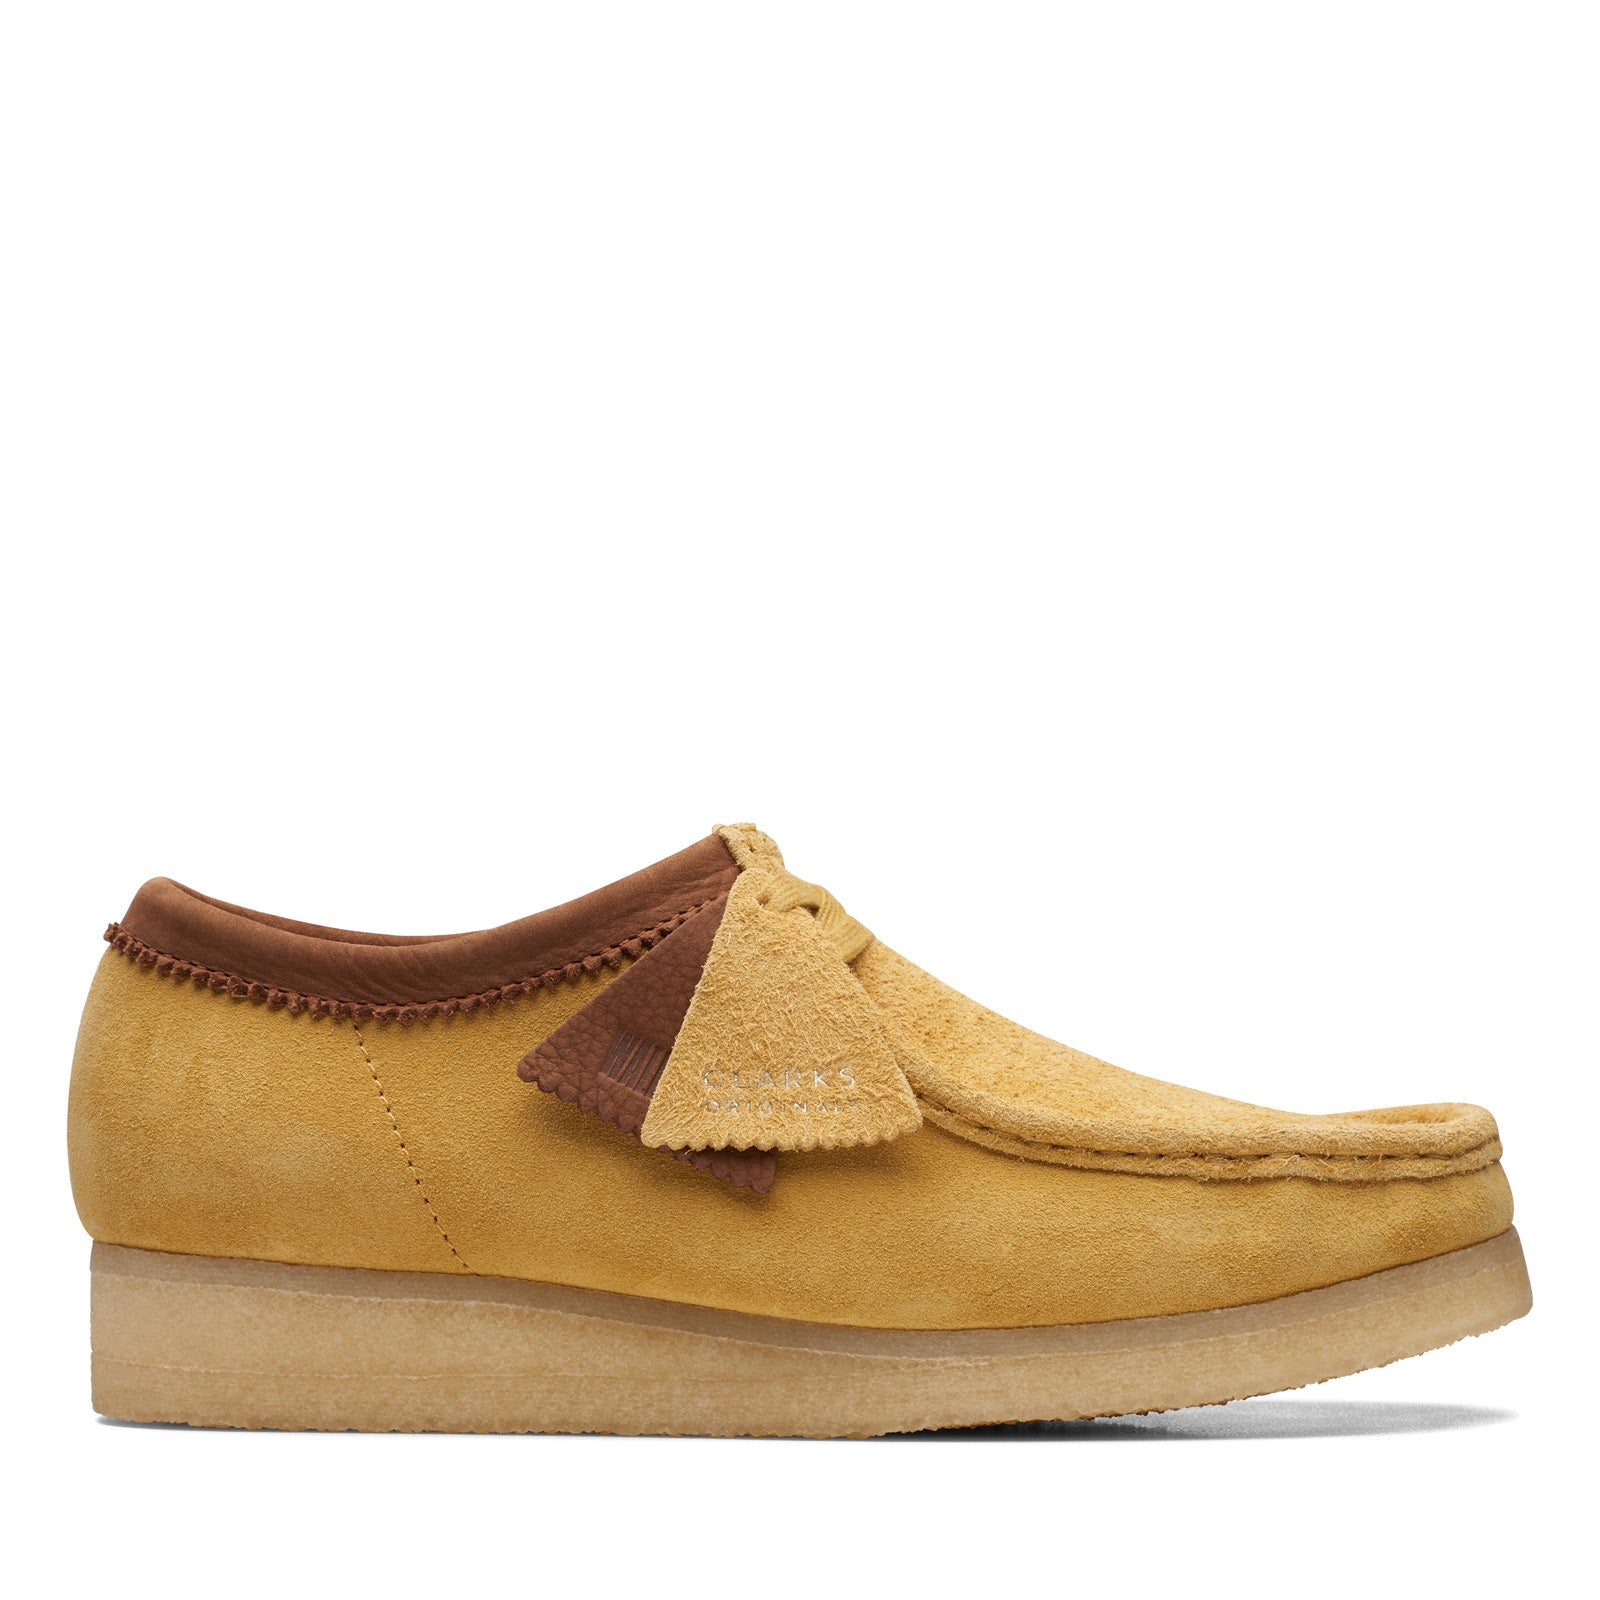 Clarks Wallabee 26170536 Mens Yellow Suede Oxfords & Lace Ups